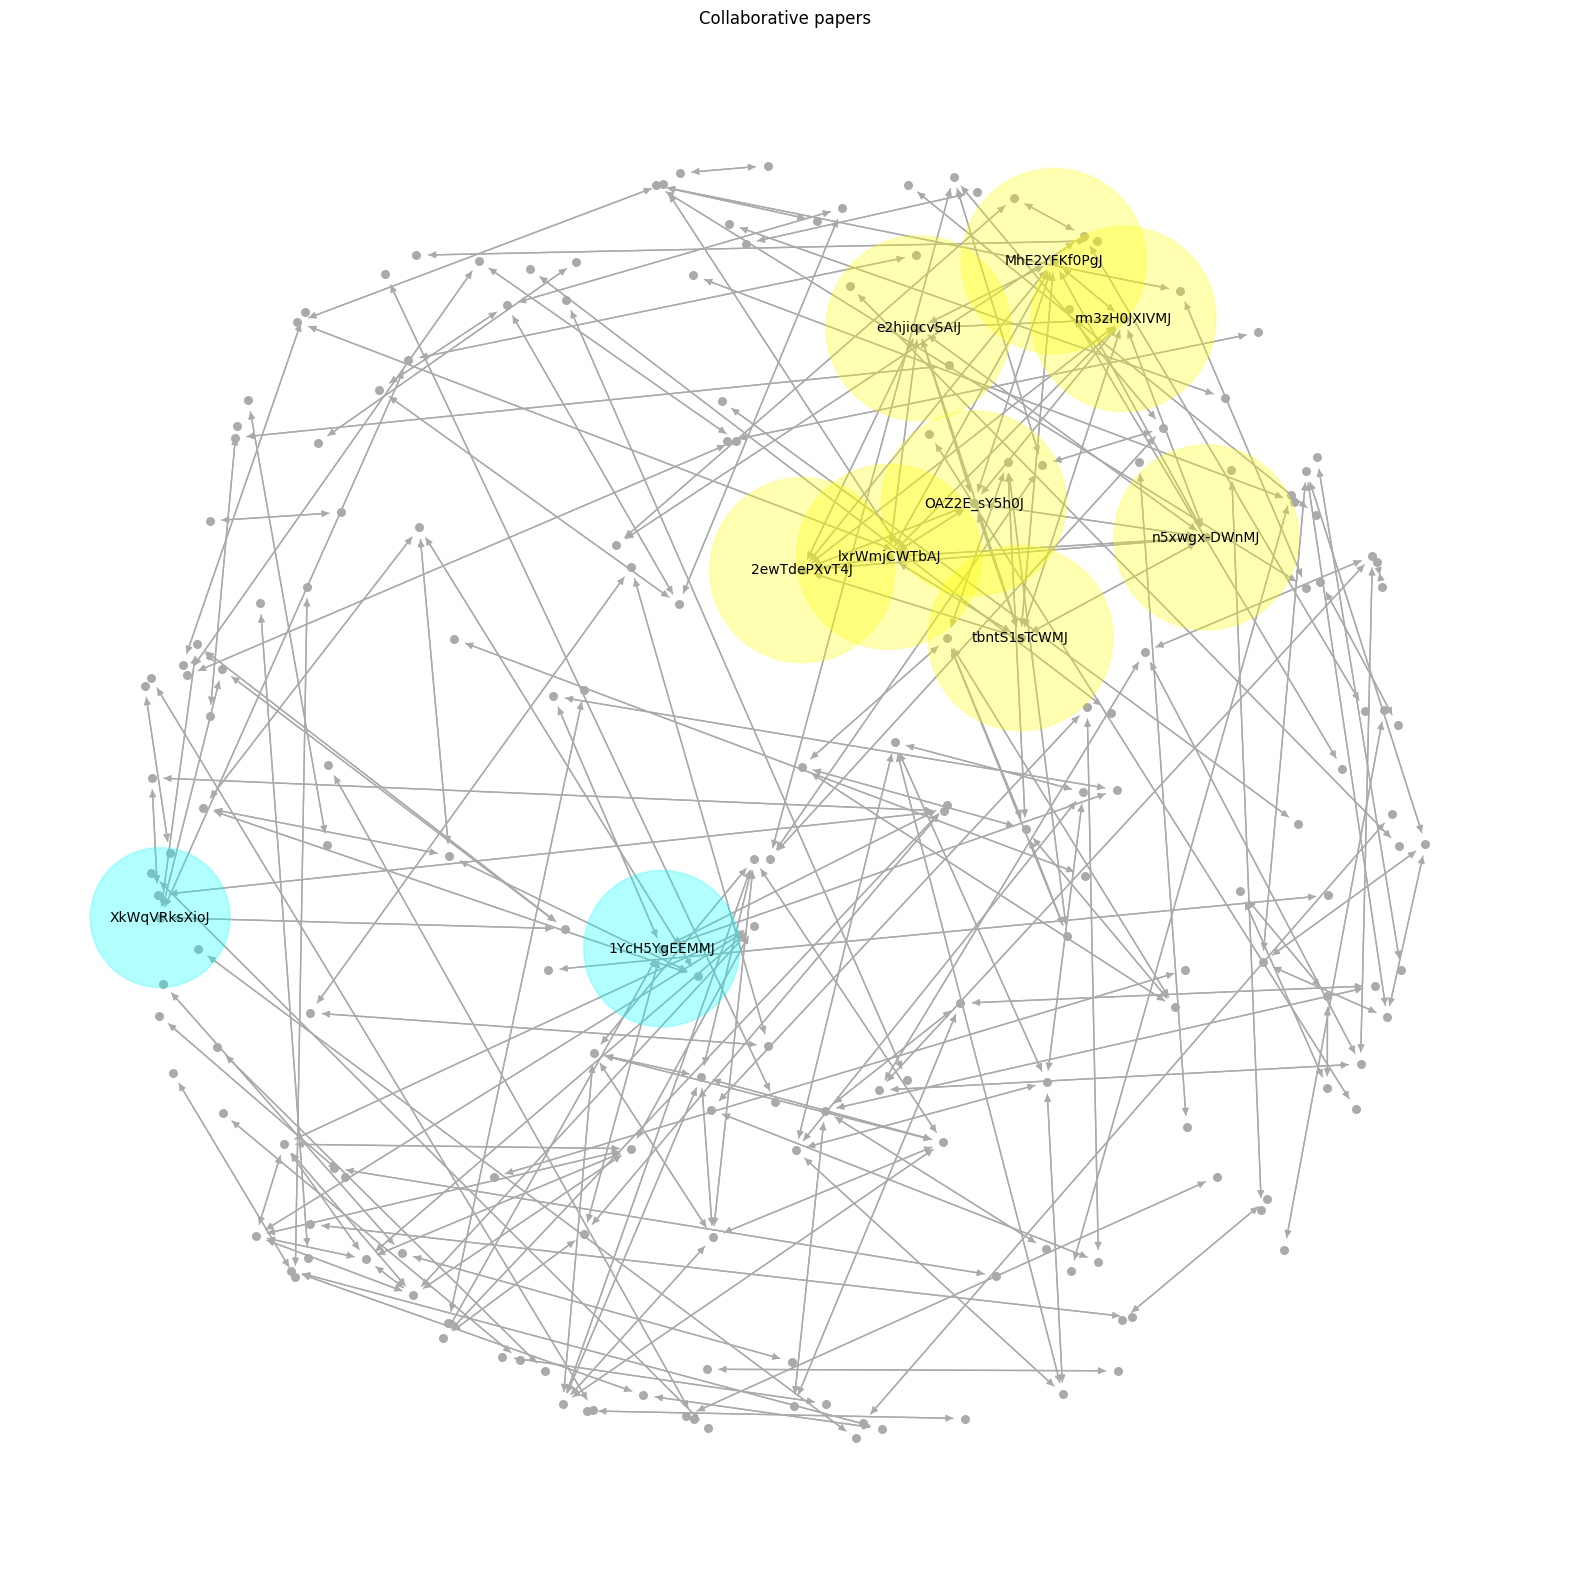 visualizing-central-papers.png